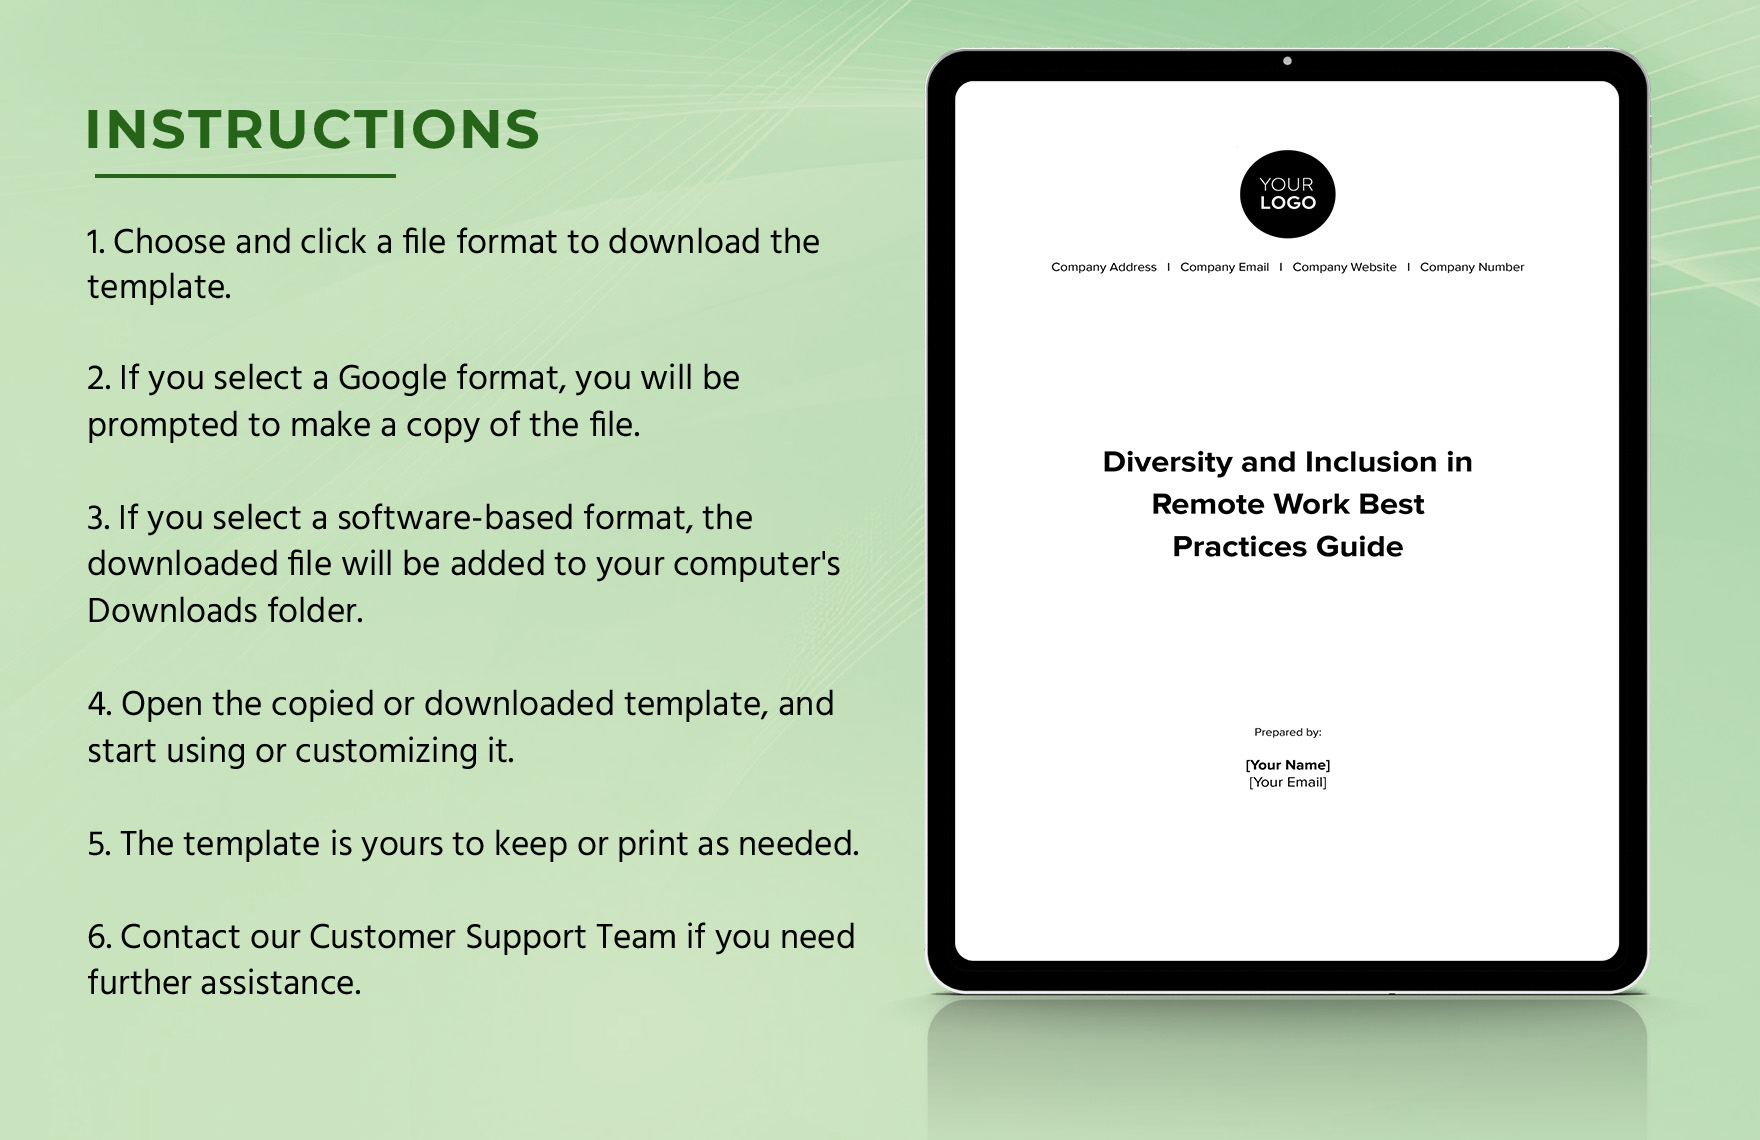 Diversity and Inclusion in Remote Work Best Practices Guide HR Template